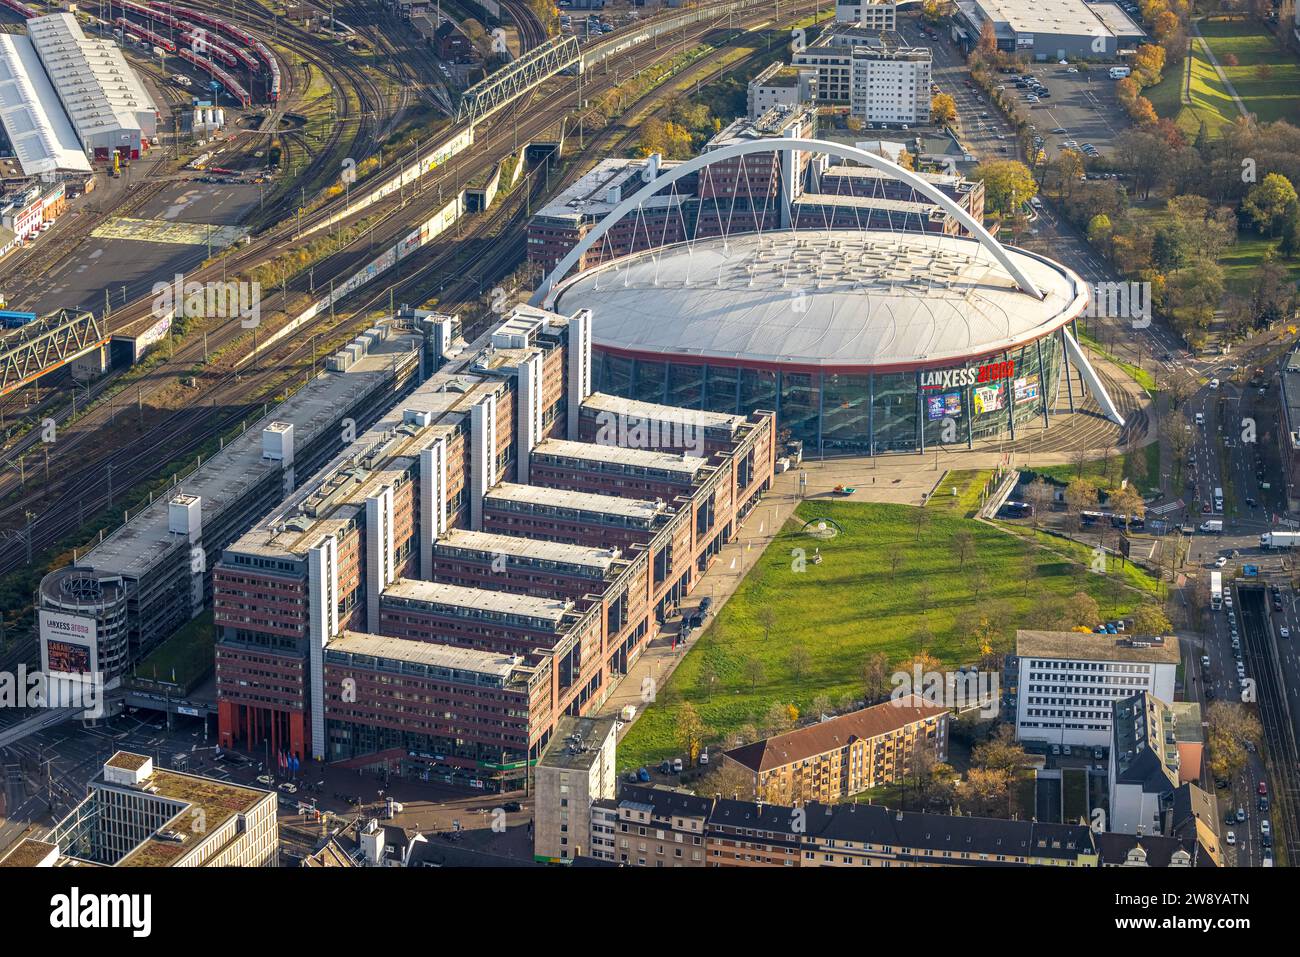 Aerial view, Lanxess Arena venue and events, Deutz, Cologne, Rhineland, North Rhine-Westphalia, Germany Stock Photo